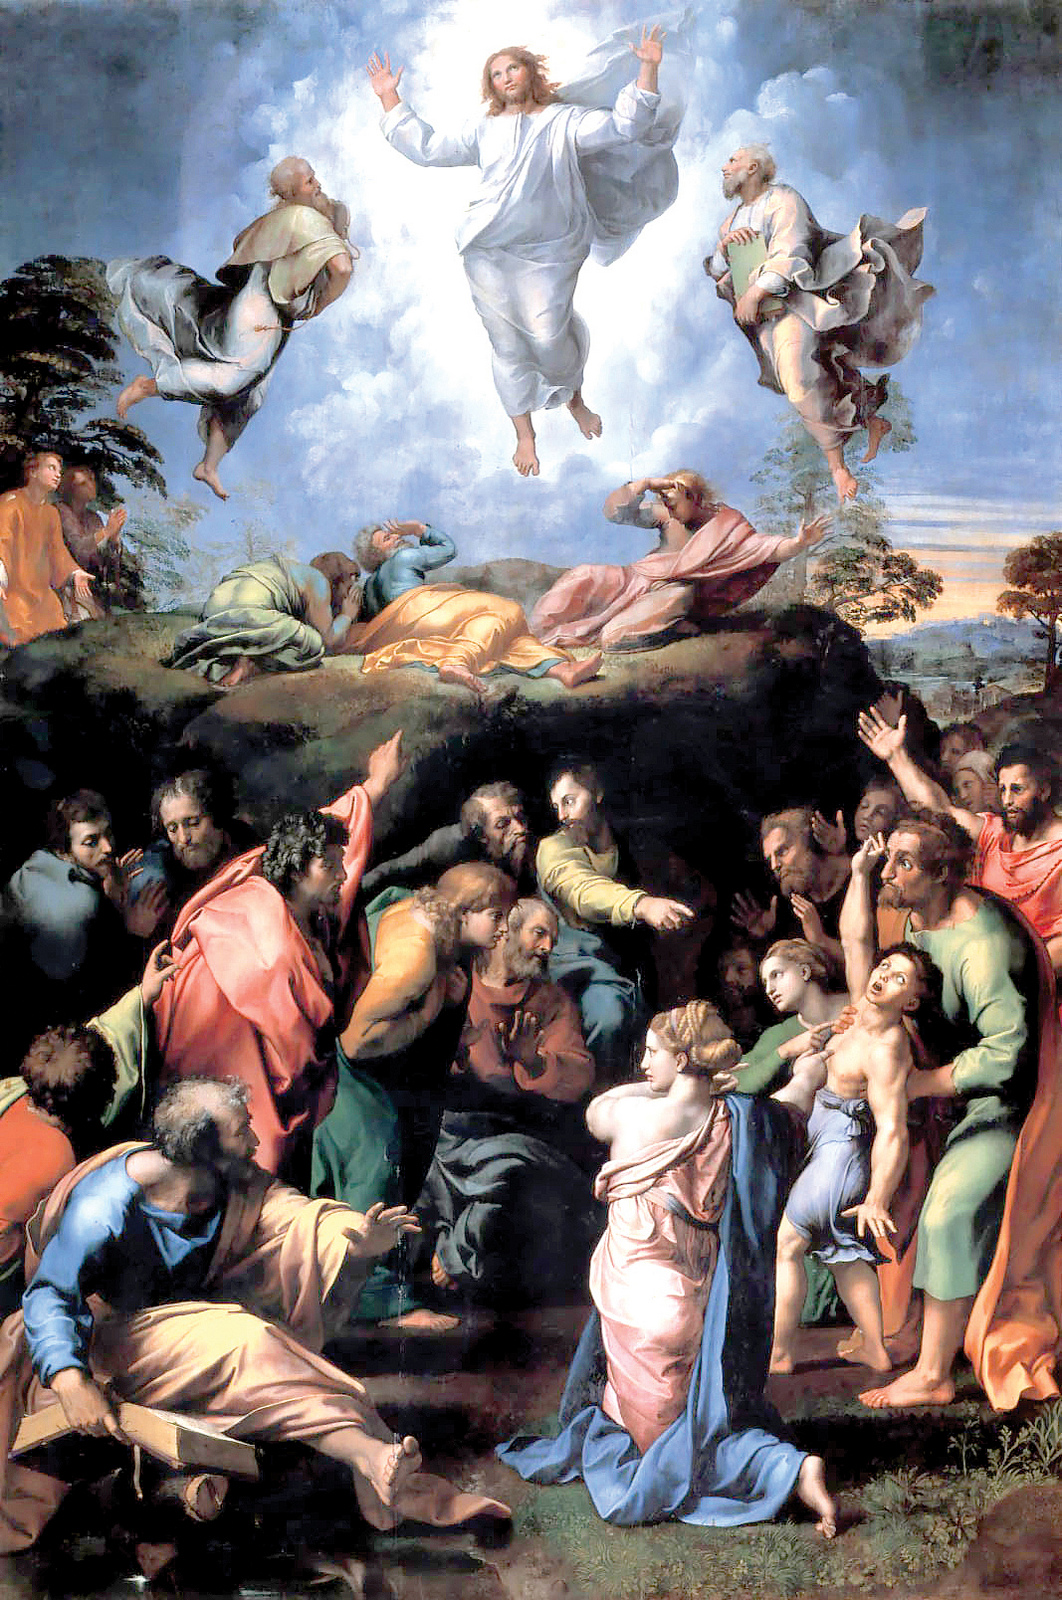 Transfiguration, by Fra Angelico